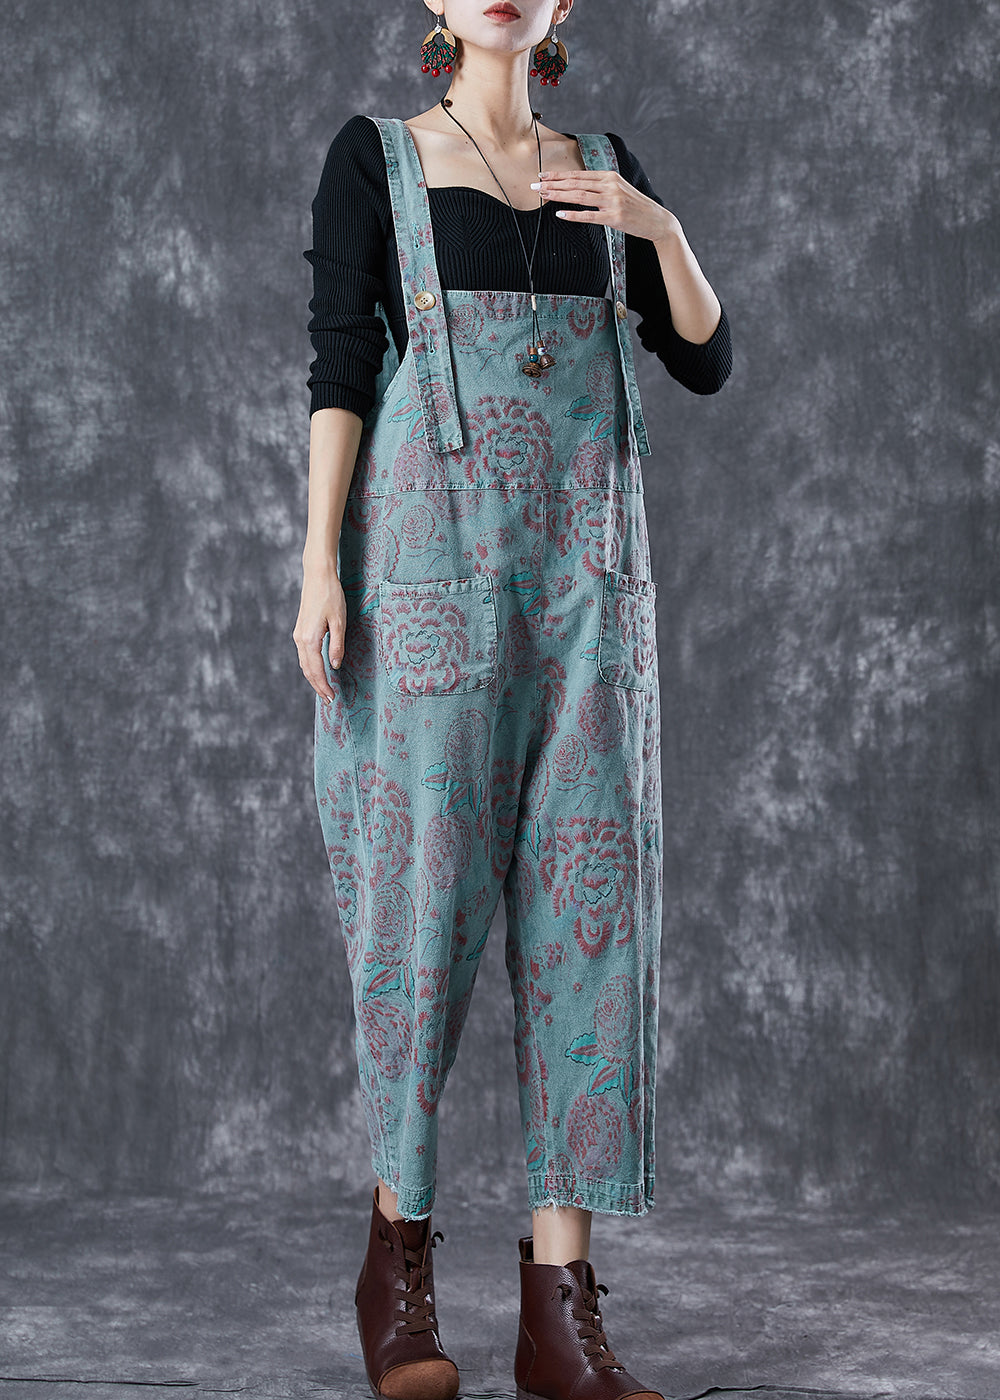 Casual Blue Oversized Print Denim Jumpsuits Summer LY6761